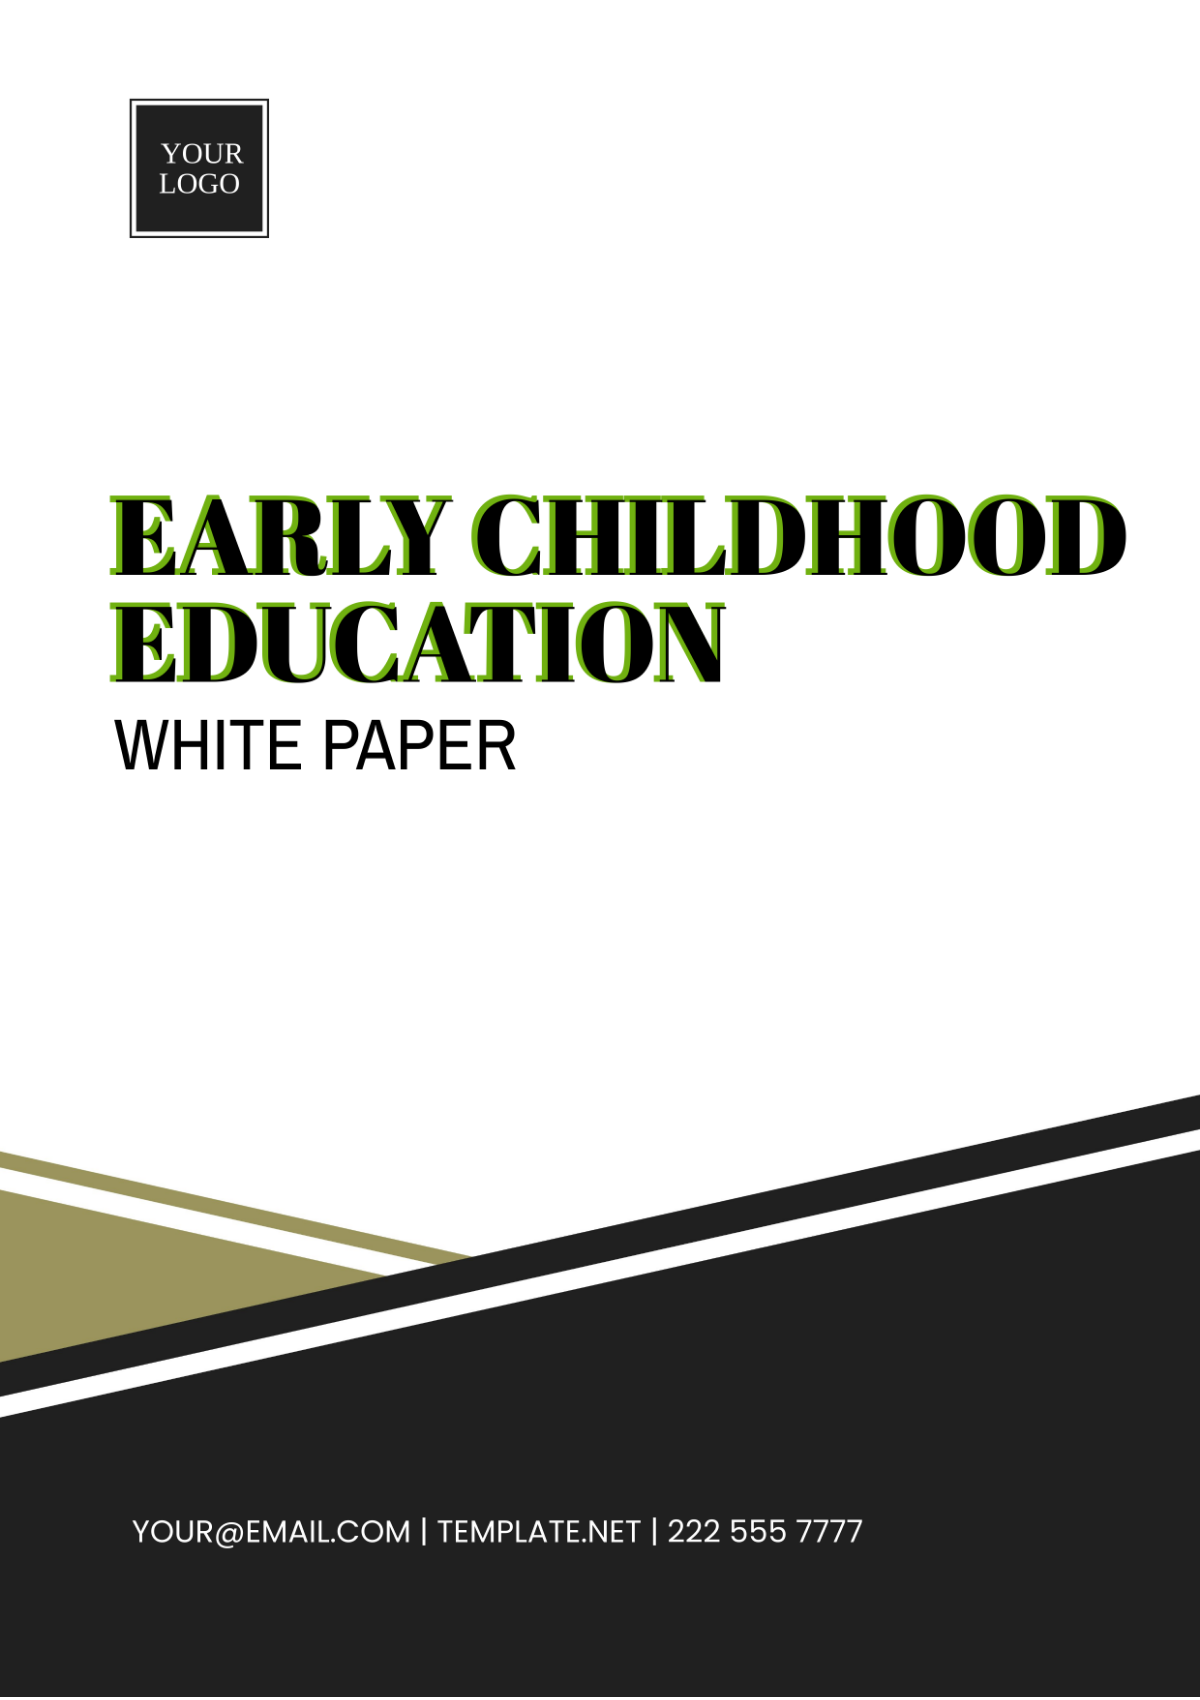 Early Childhood Education White Paper Template